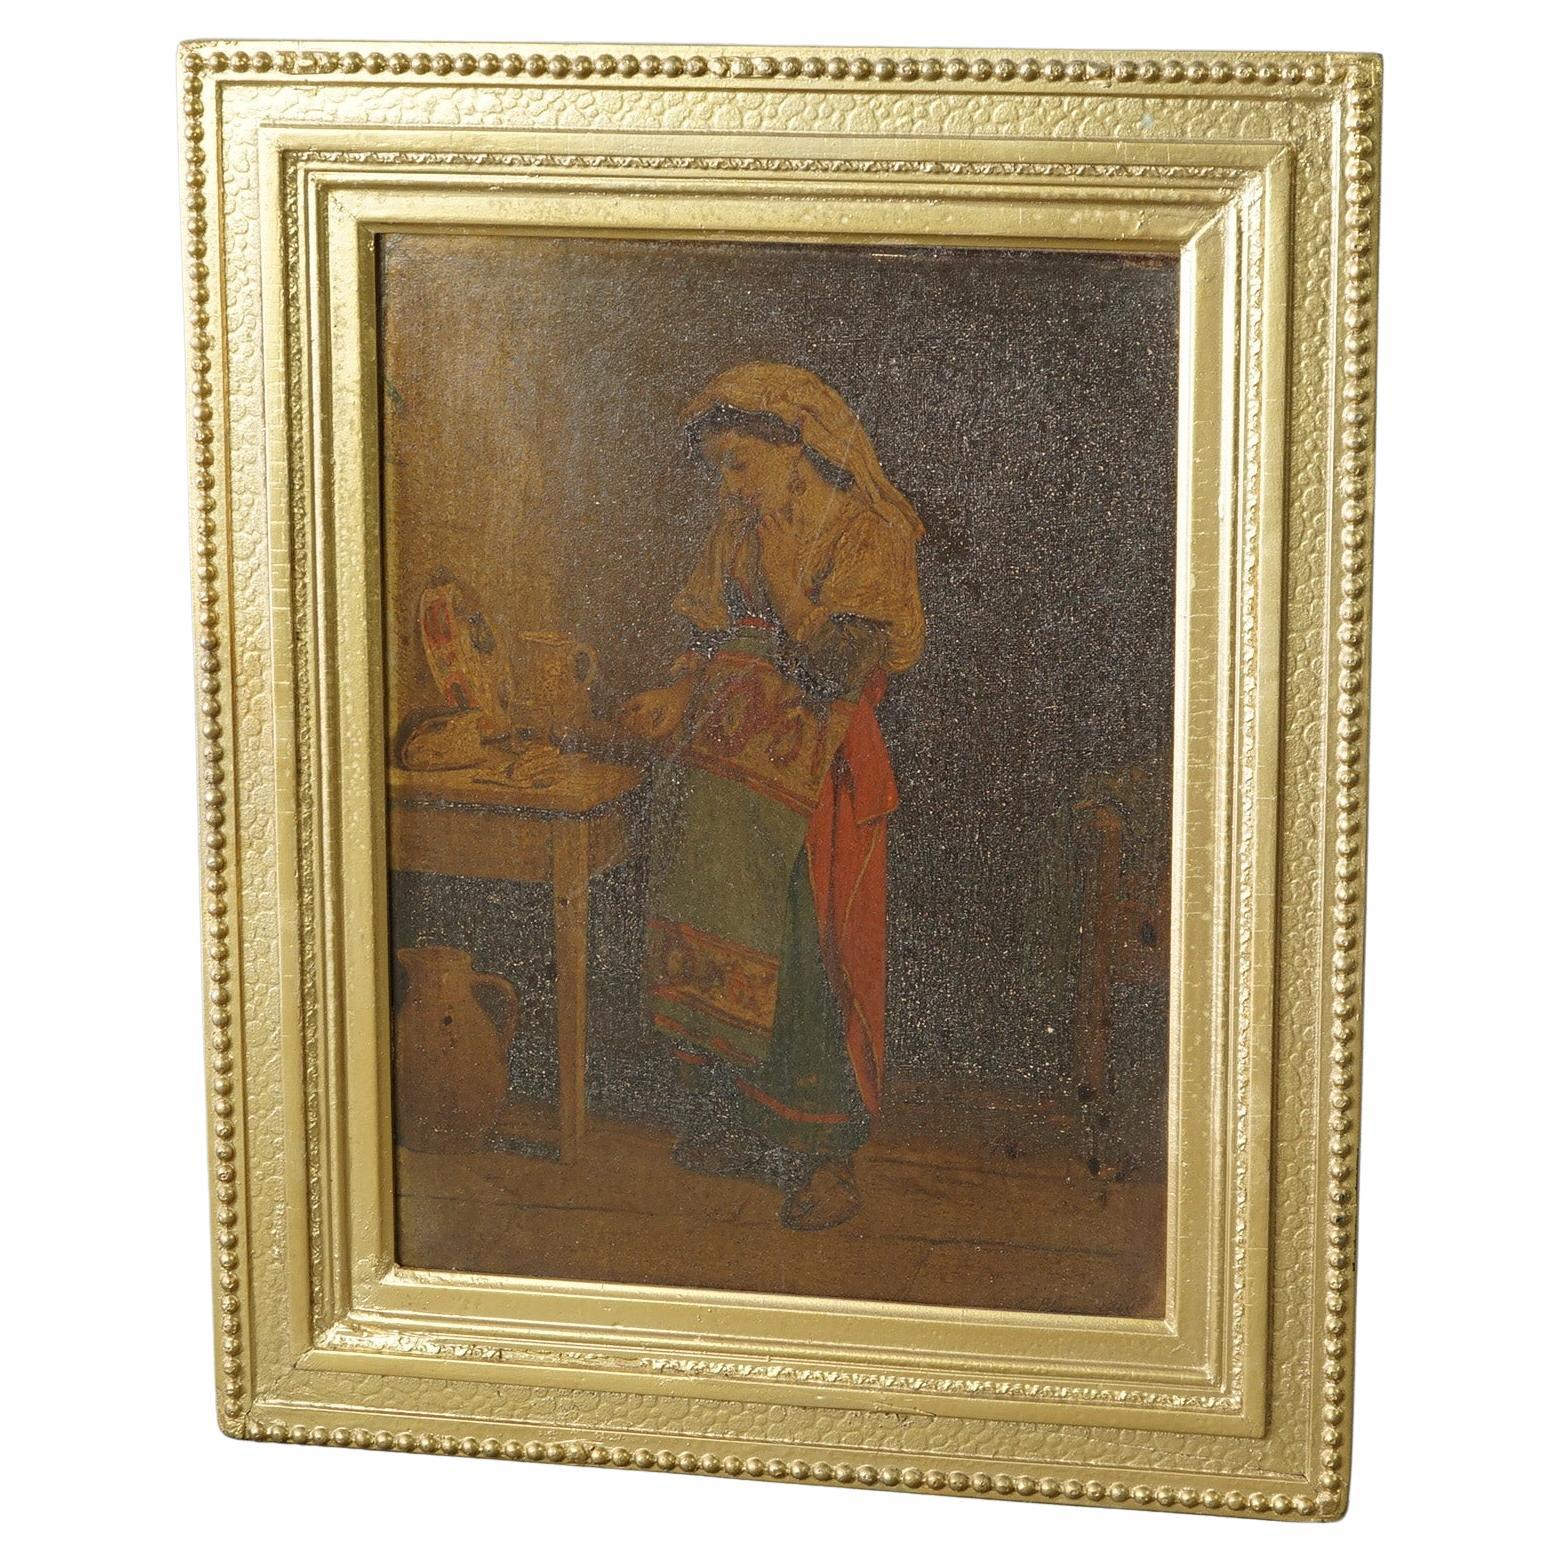 An antique painting offers oil on wood board portrait of a woman, artist signed lower right, seated in giltwood frame, 19th century

Measures - 16.25